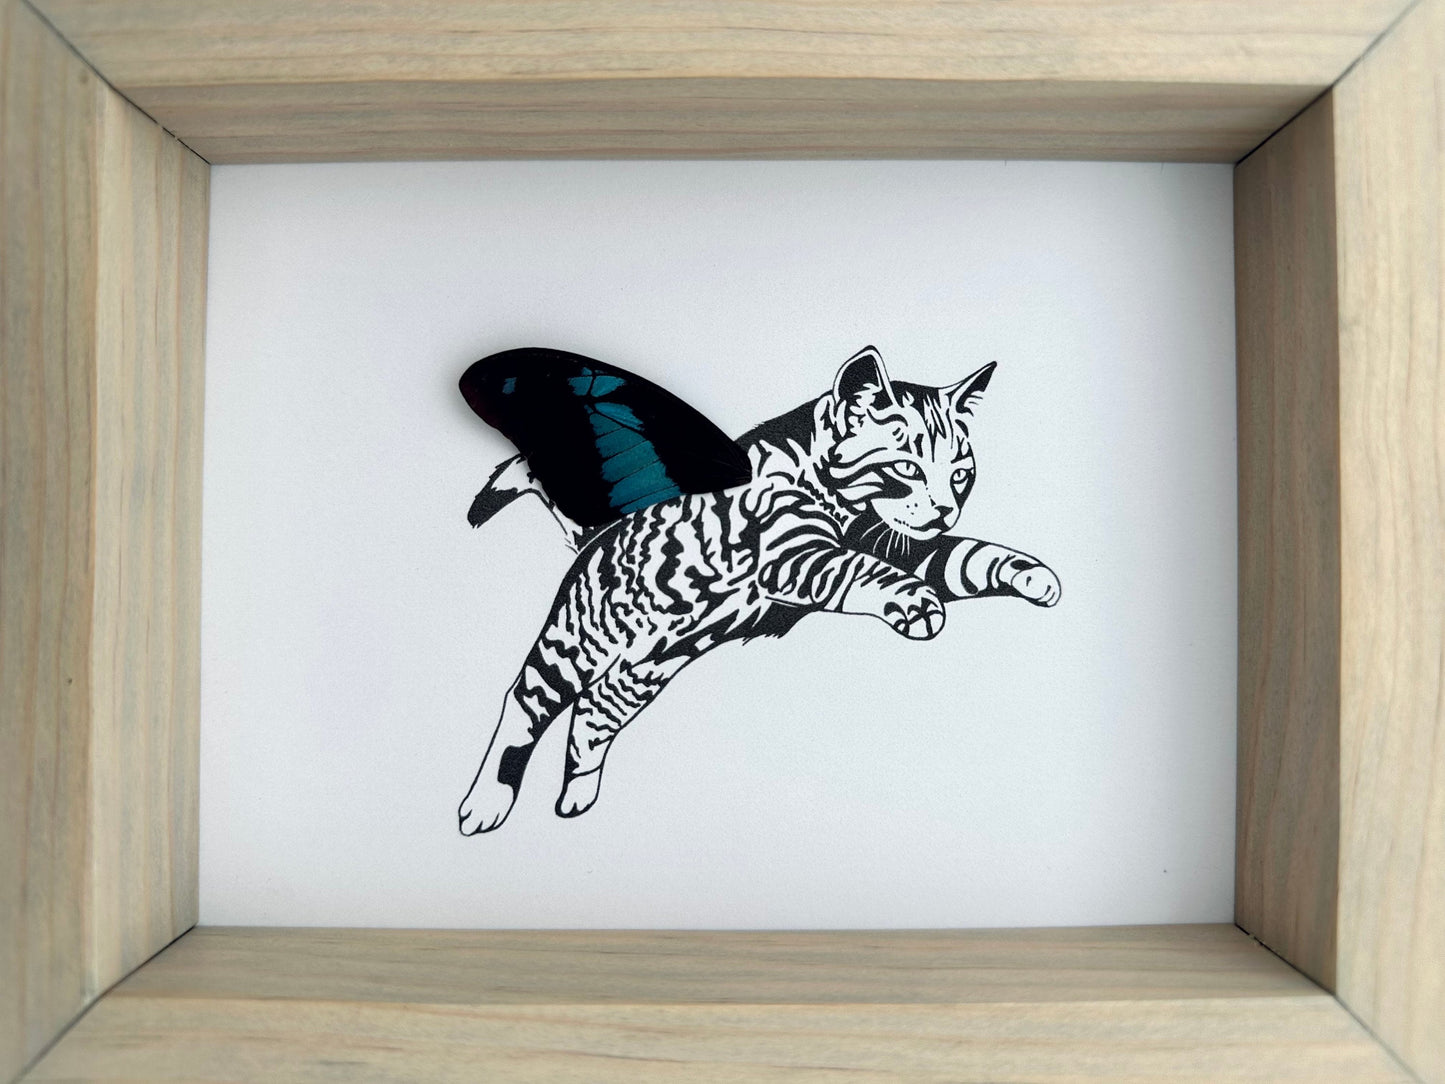 Tabby Striped Cat Real Butterfly Wing Art Ethically Sourced Made in MN USA - Holly Ulm - Isms Butterfly Conservation Art